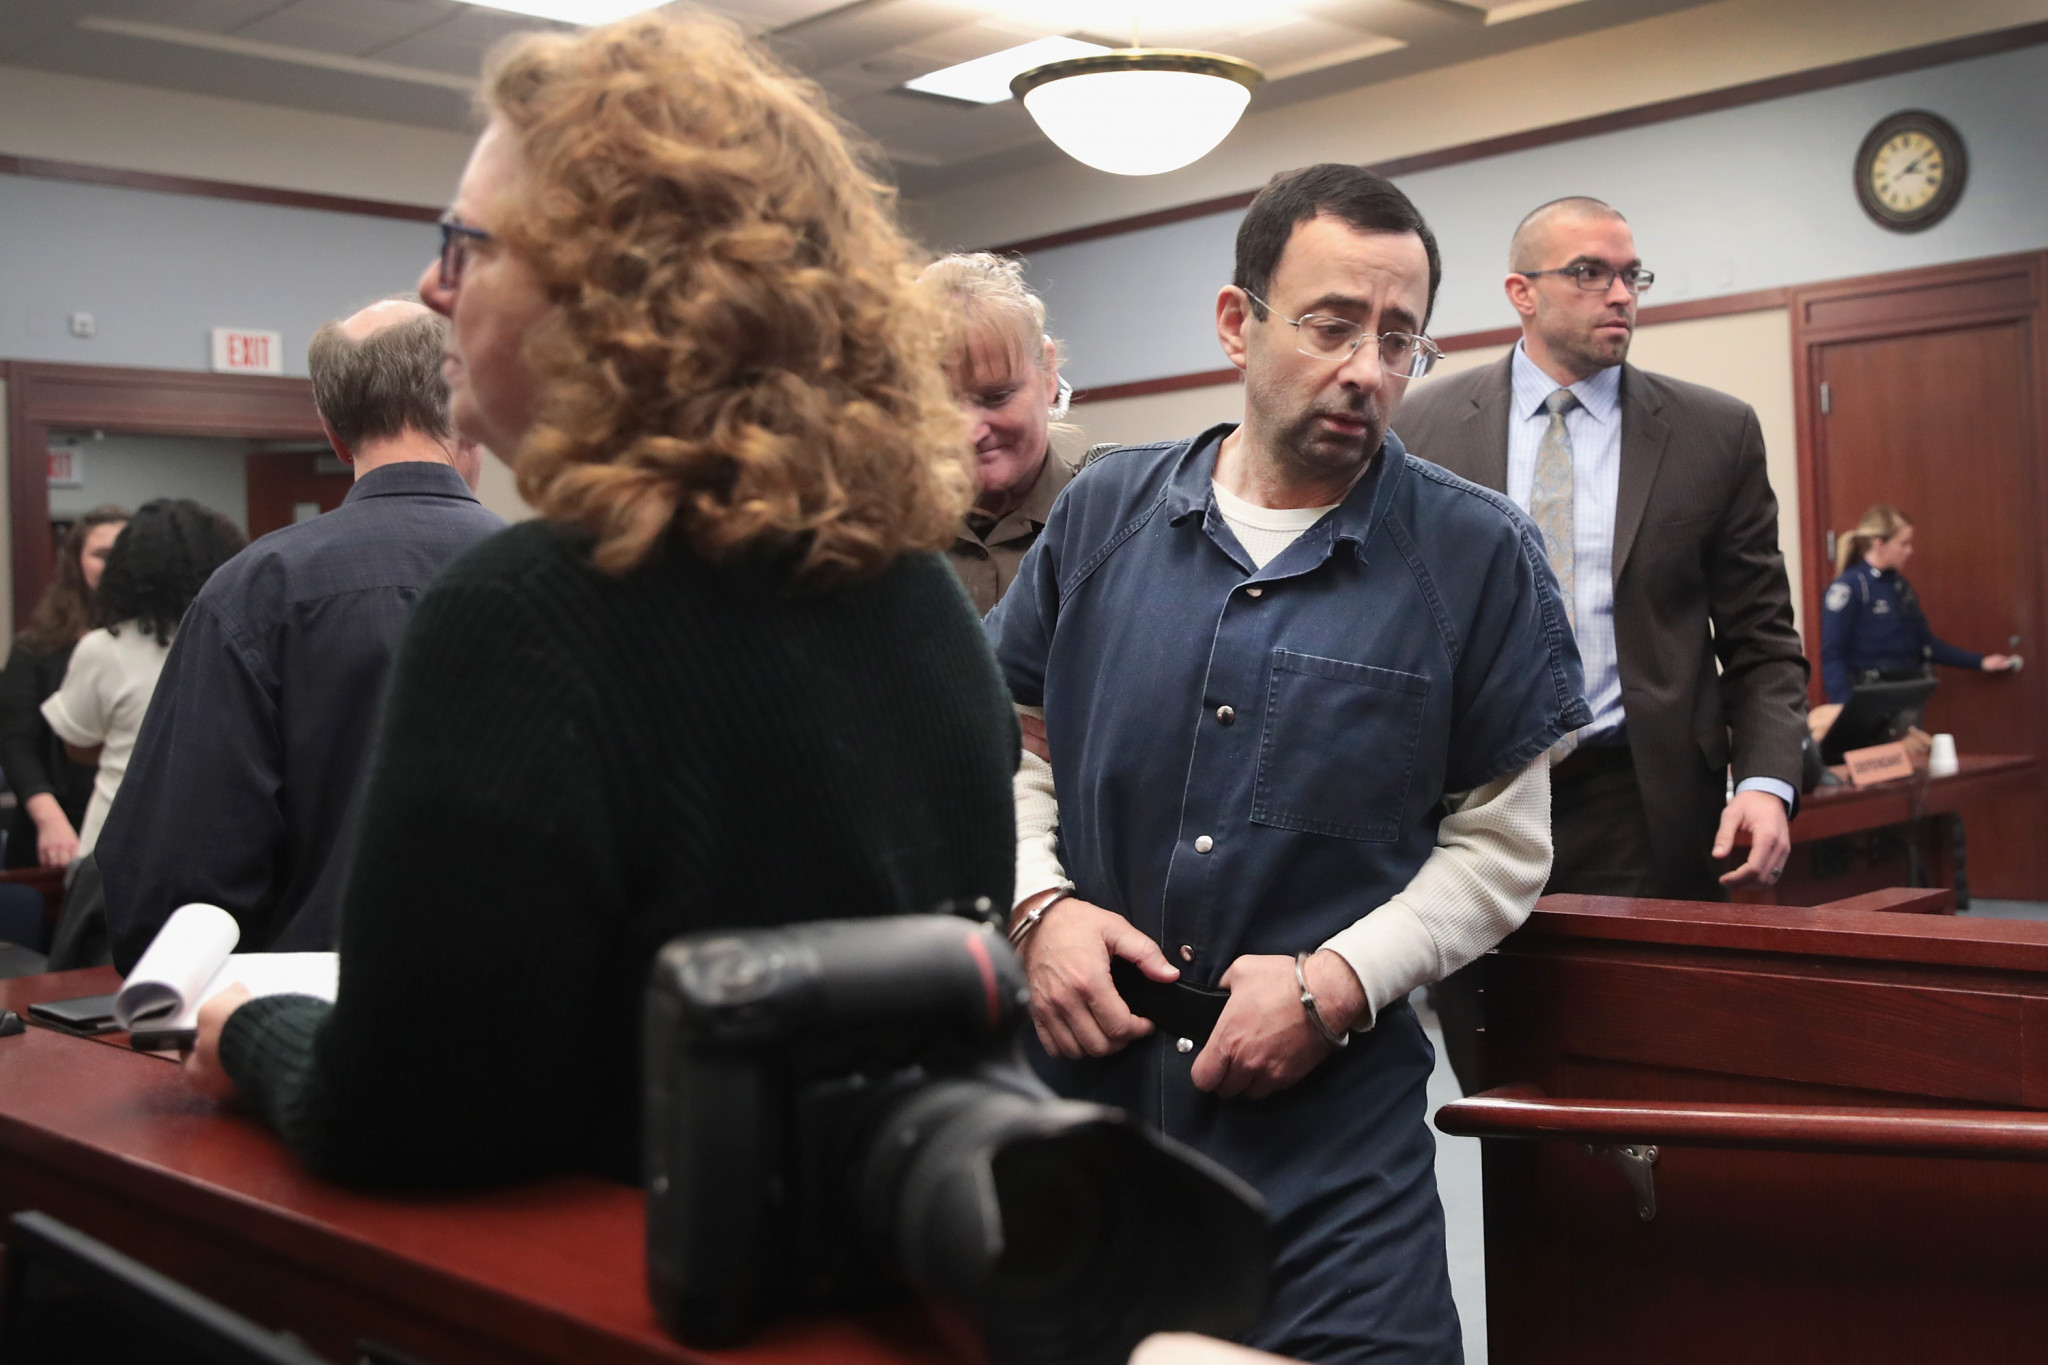 Larry Nassar is accused of sexual abuse by over 100 women ©Getty Images